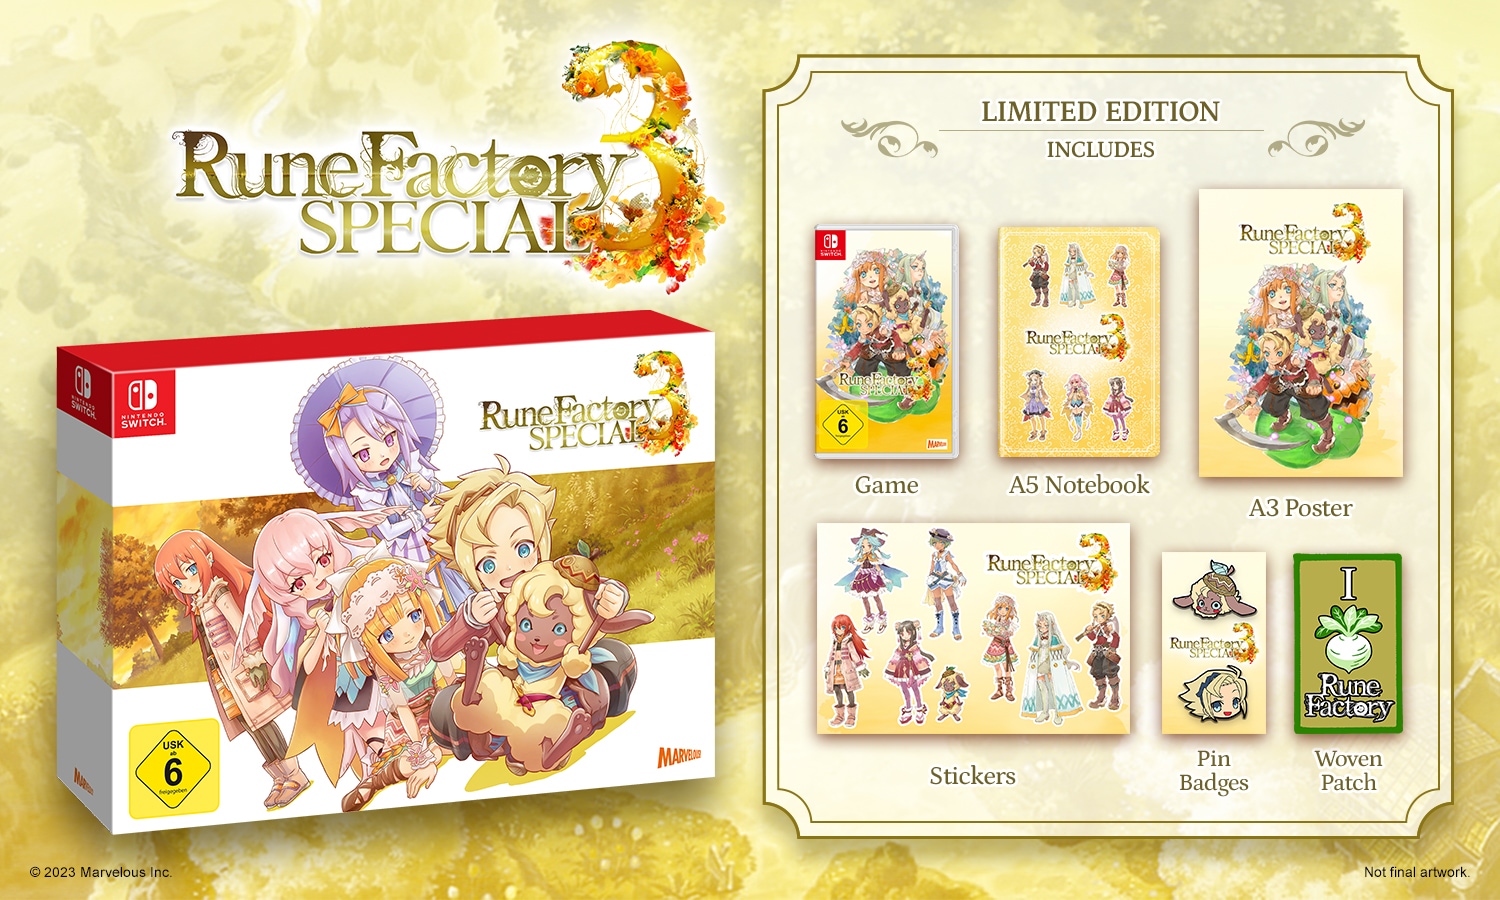 Marvelous Games Spielesoftware »Rune Factory 3 Special...